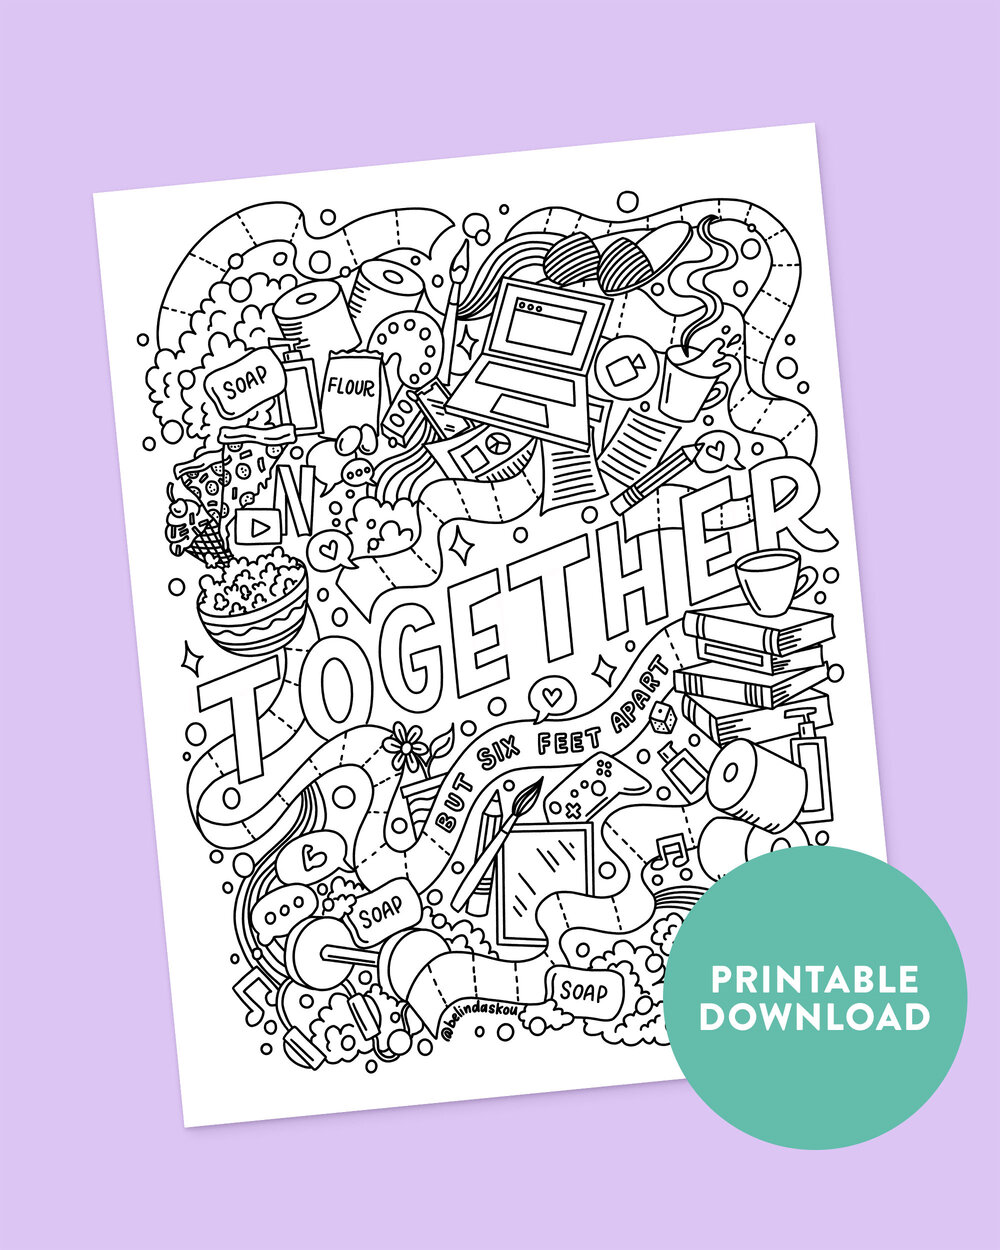 Printable Coloring Sheets Instant Download Hand-Drawn Quarantine Coloring Pages- Set of 2 Classroom Fun